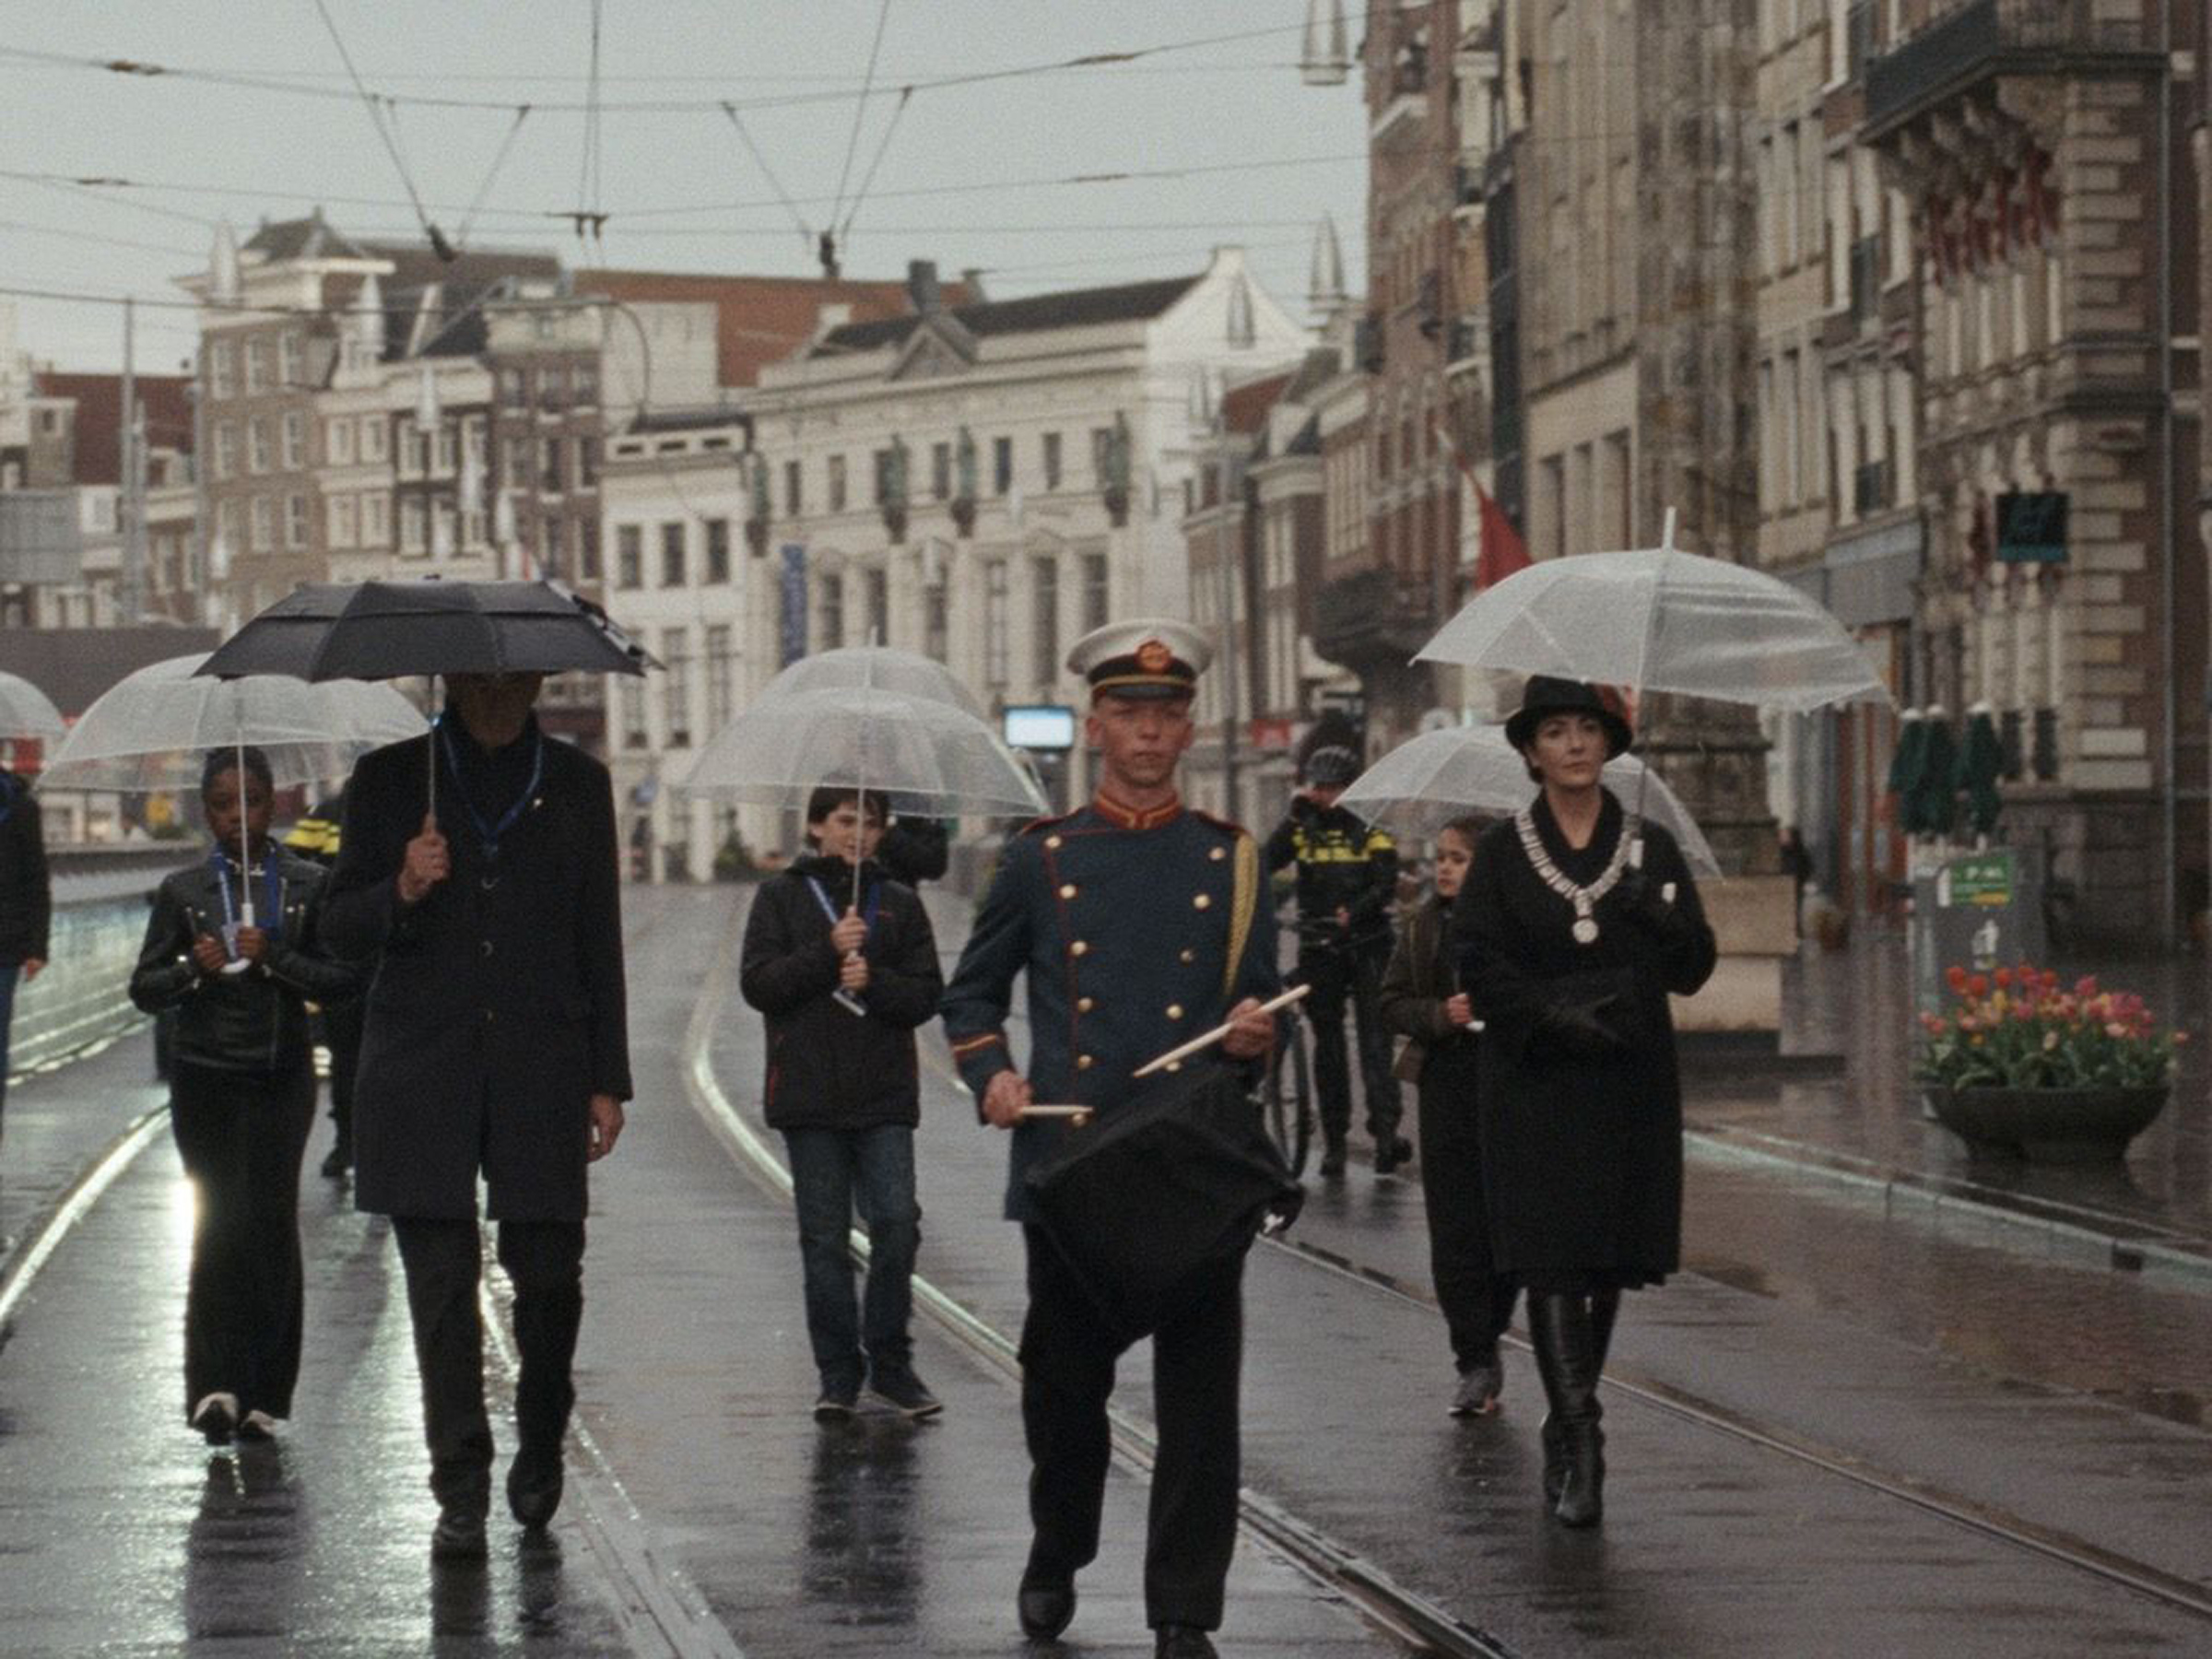 Steve McQueen's <i>Occupied City</i> is an exploration of Amsterdam's layered history. (Courtesy A24)